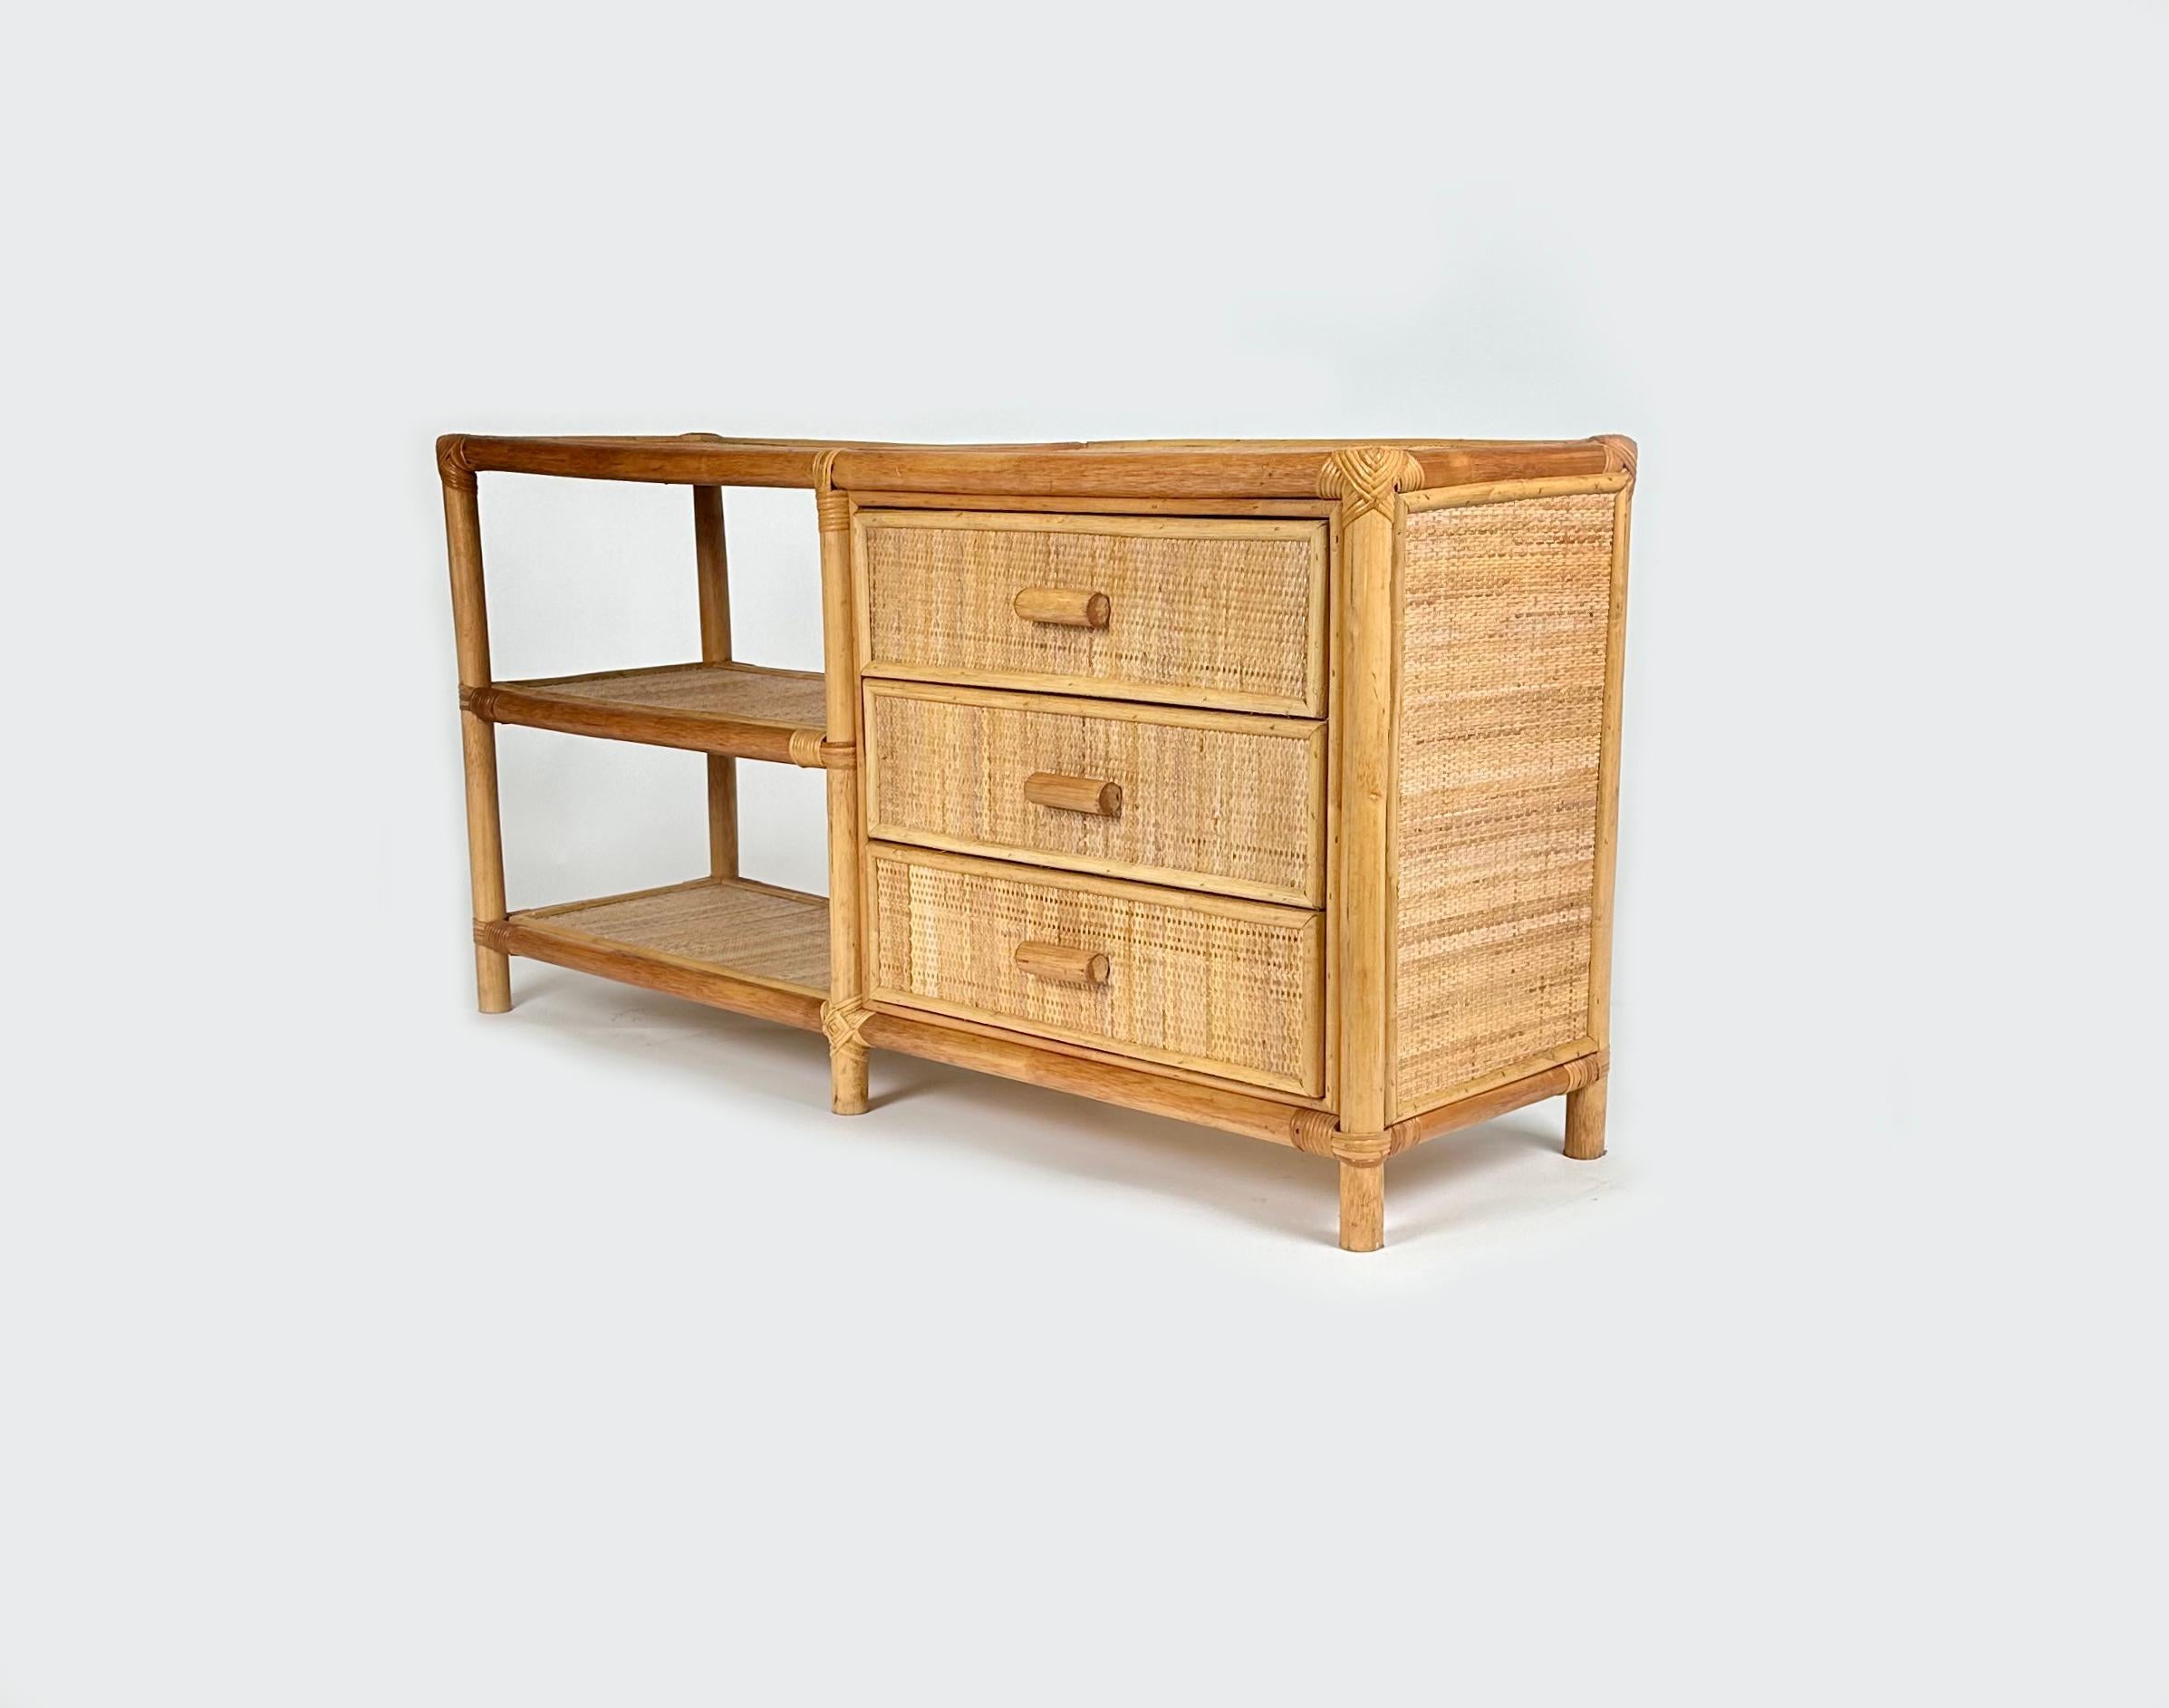 Italian Midcentury Bamboo and Rattan Cabinet Sideboard whit Drawers, Italy 1970s For Sale